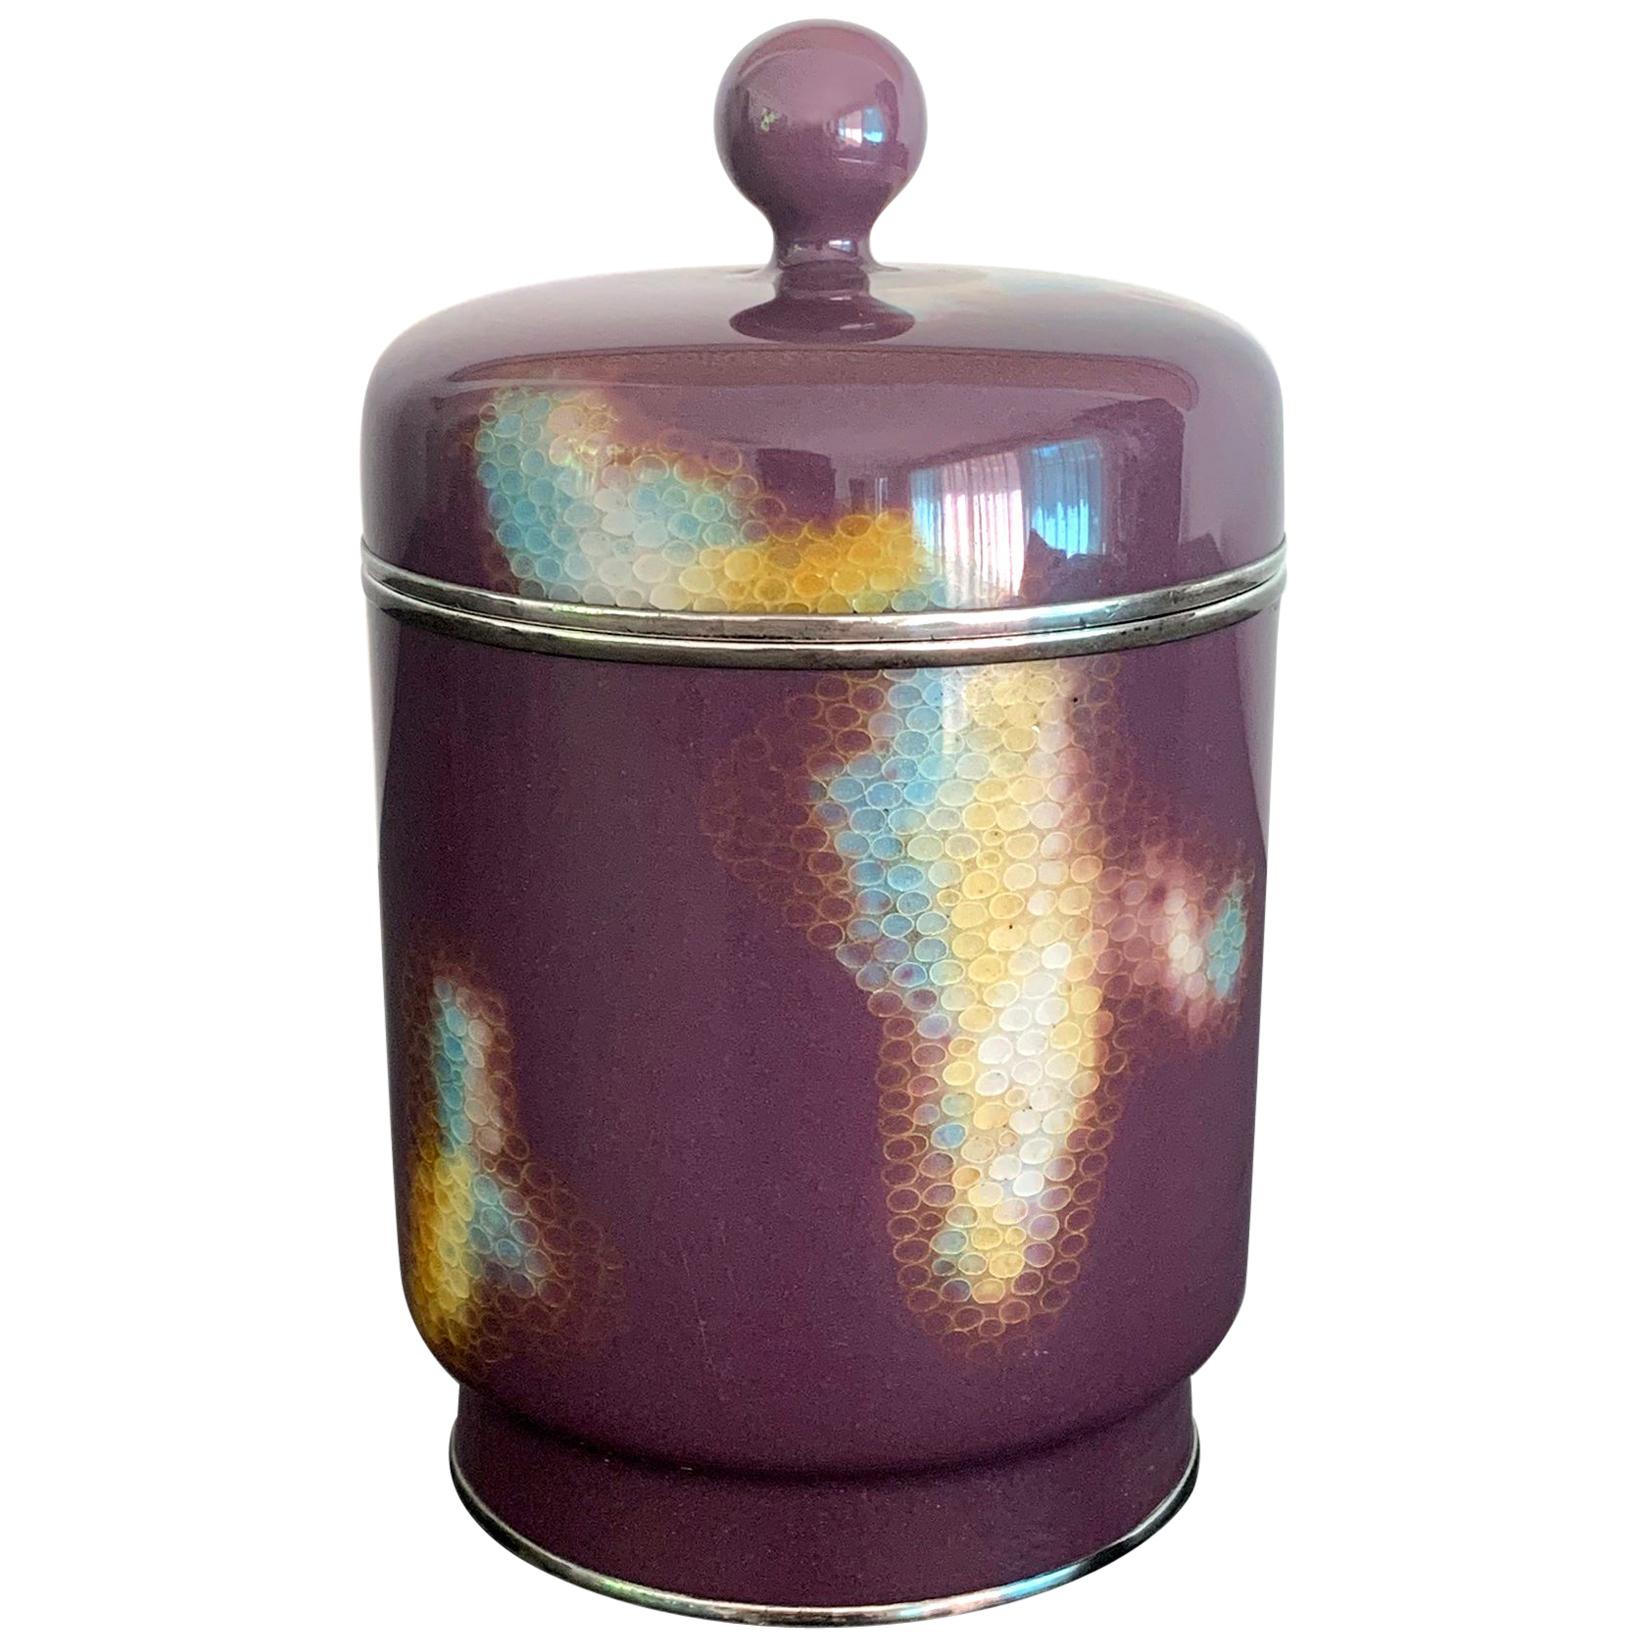 Japanese Cloisonné Covered Jar by Ando Jubei